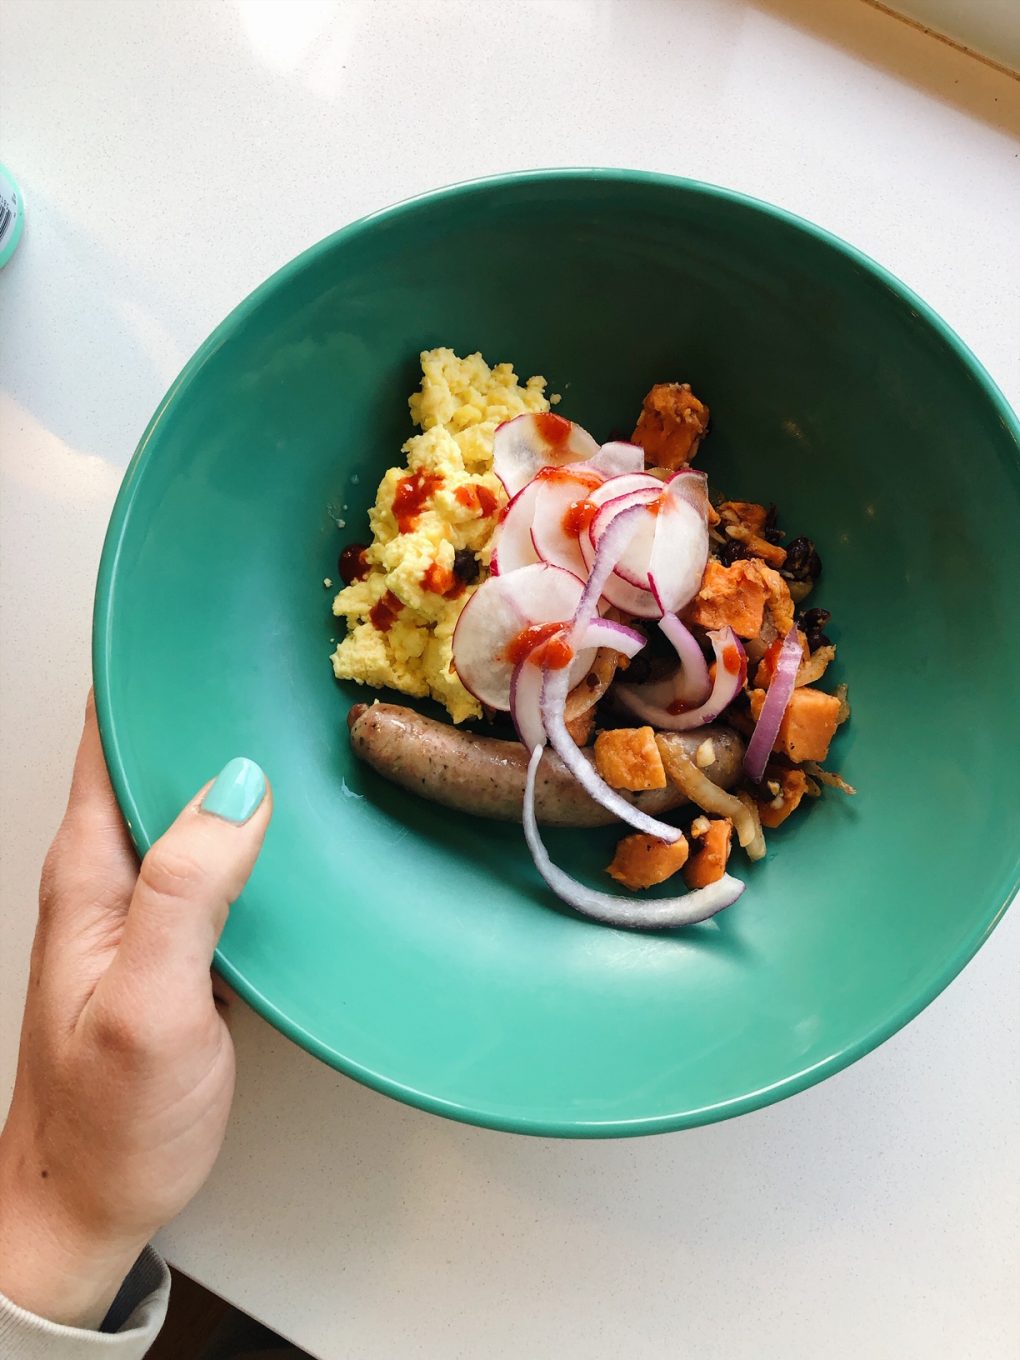 Whole foods breakfast in a green dish on a white background. In the bowl - scrambled eggs, sausage, sweet potatoes, black beans, and red onion + hot sauce